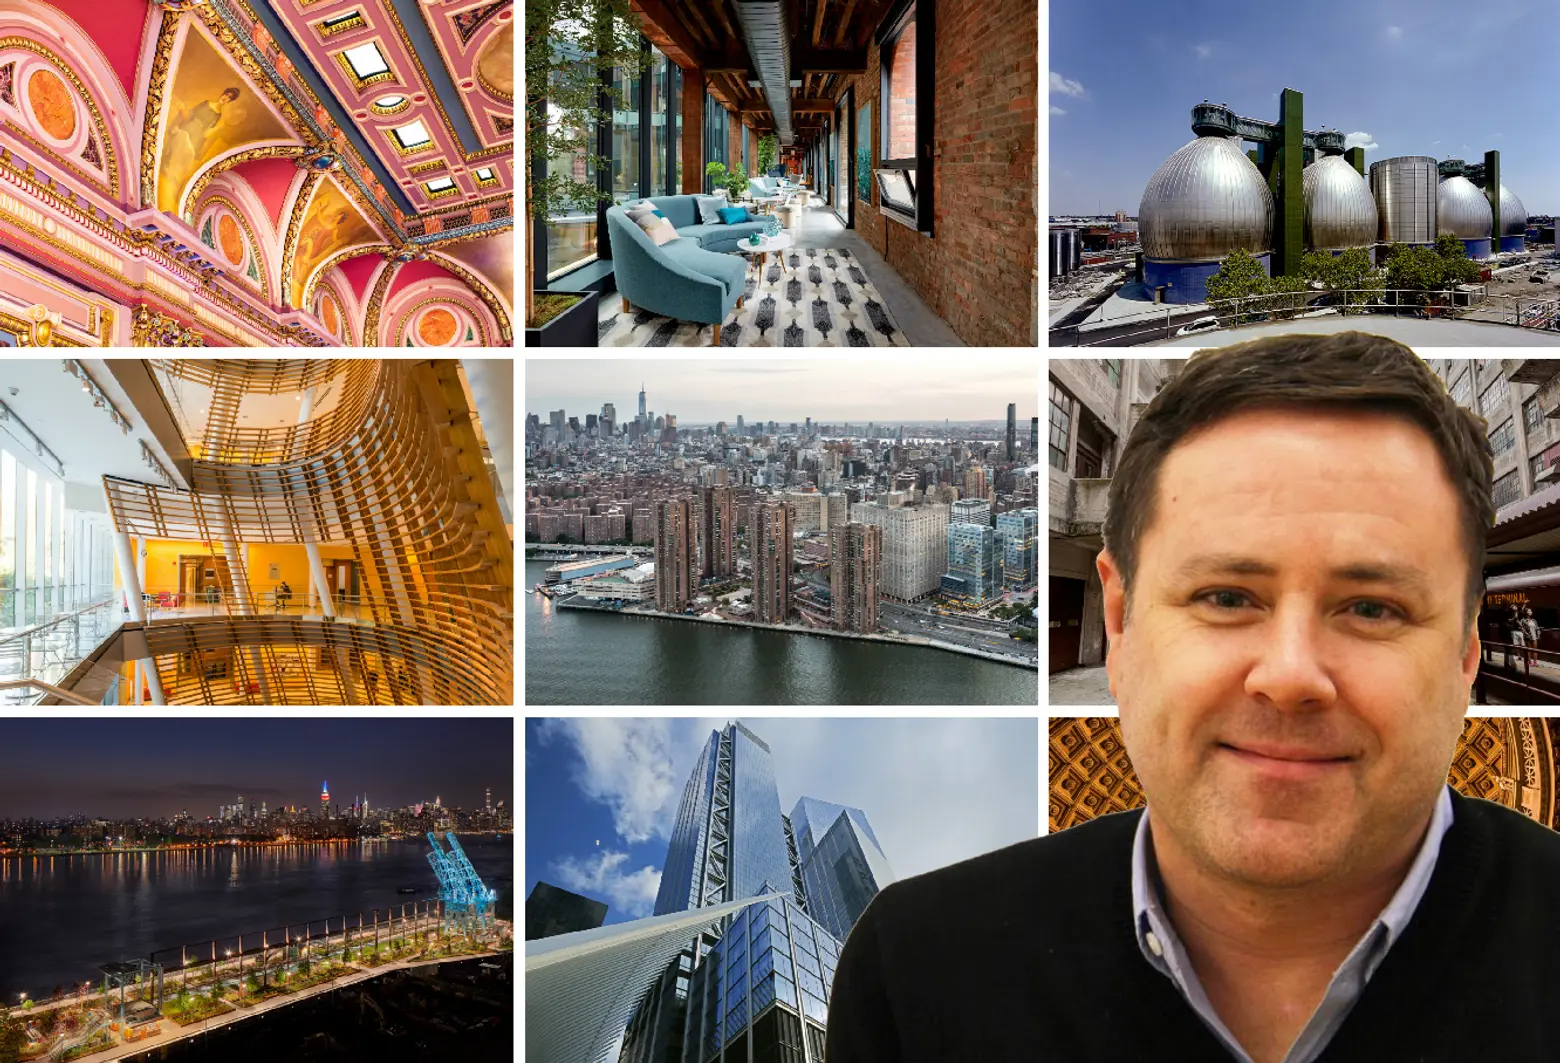 Where I Work: Gregory Wessner organizes NYC’s biggest ’Open House’